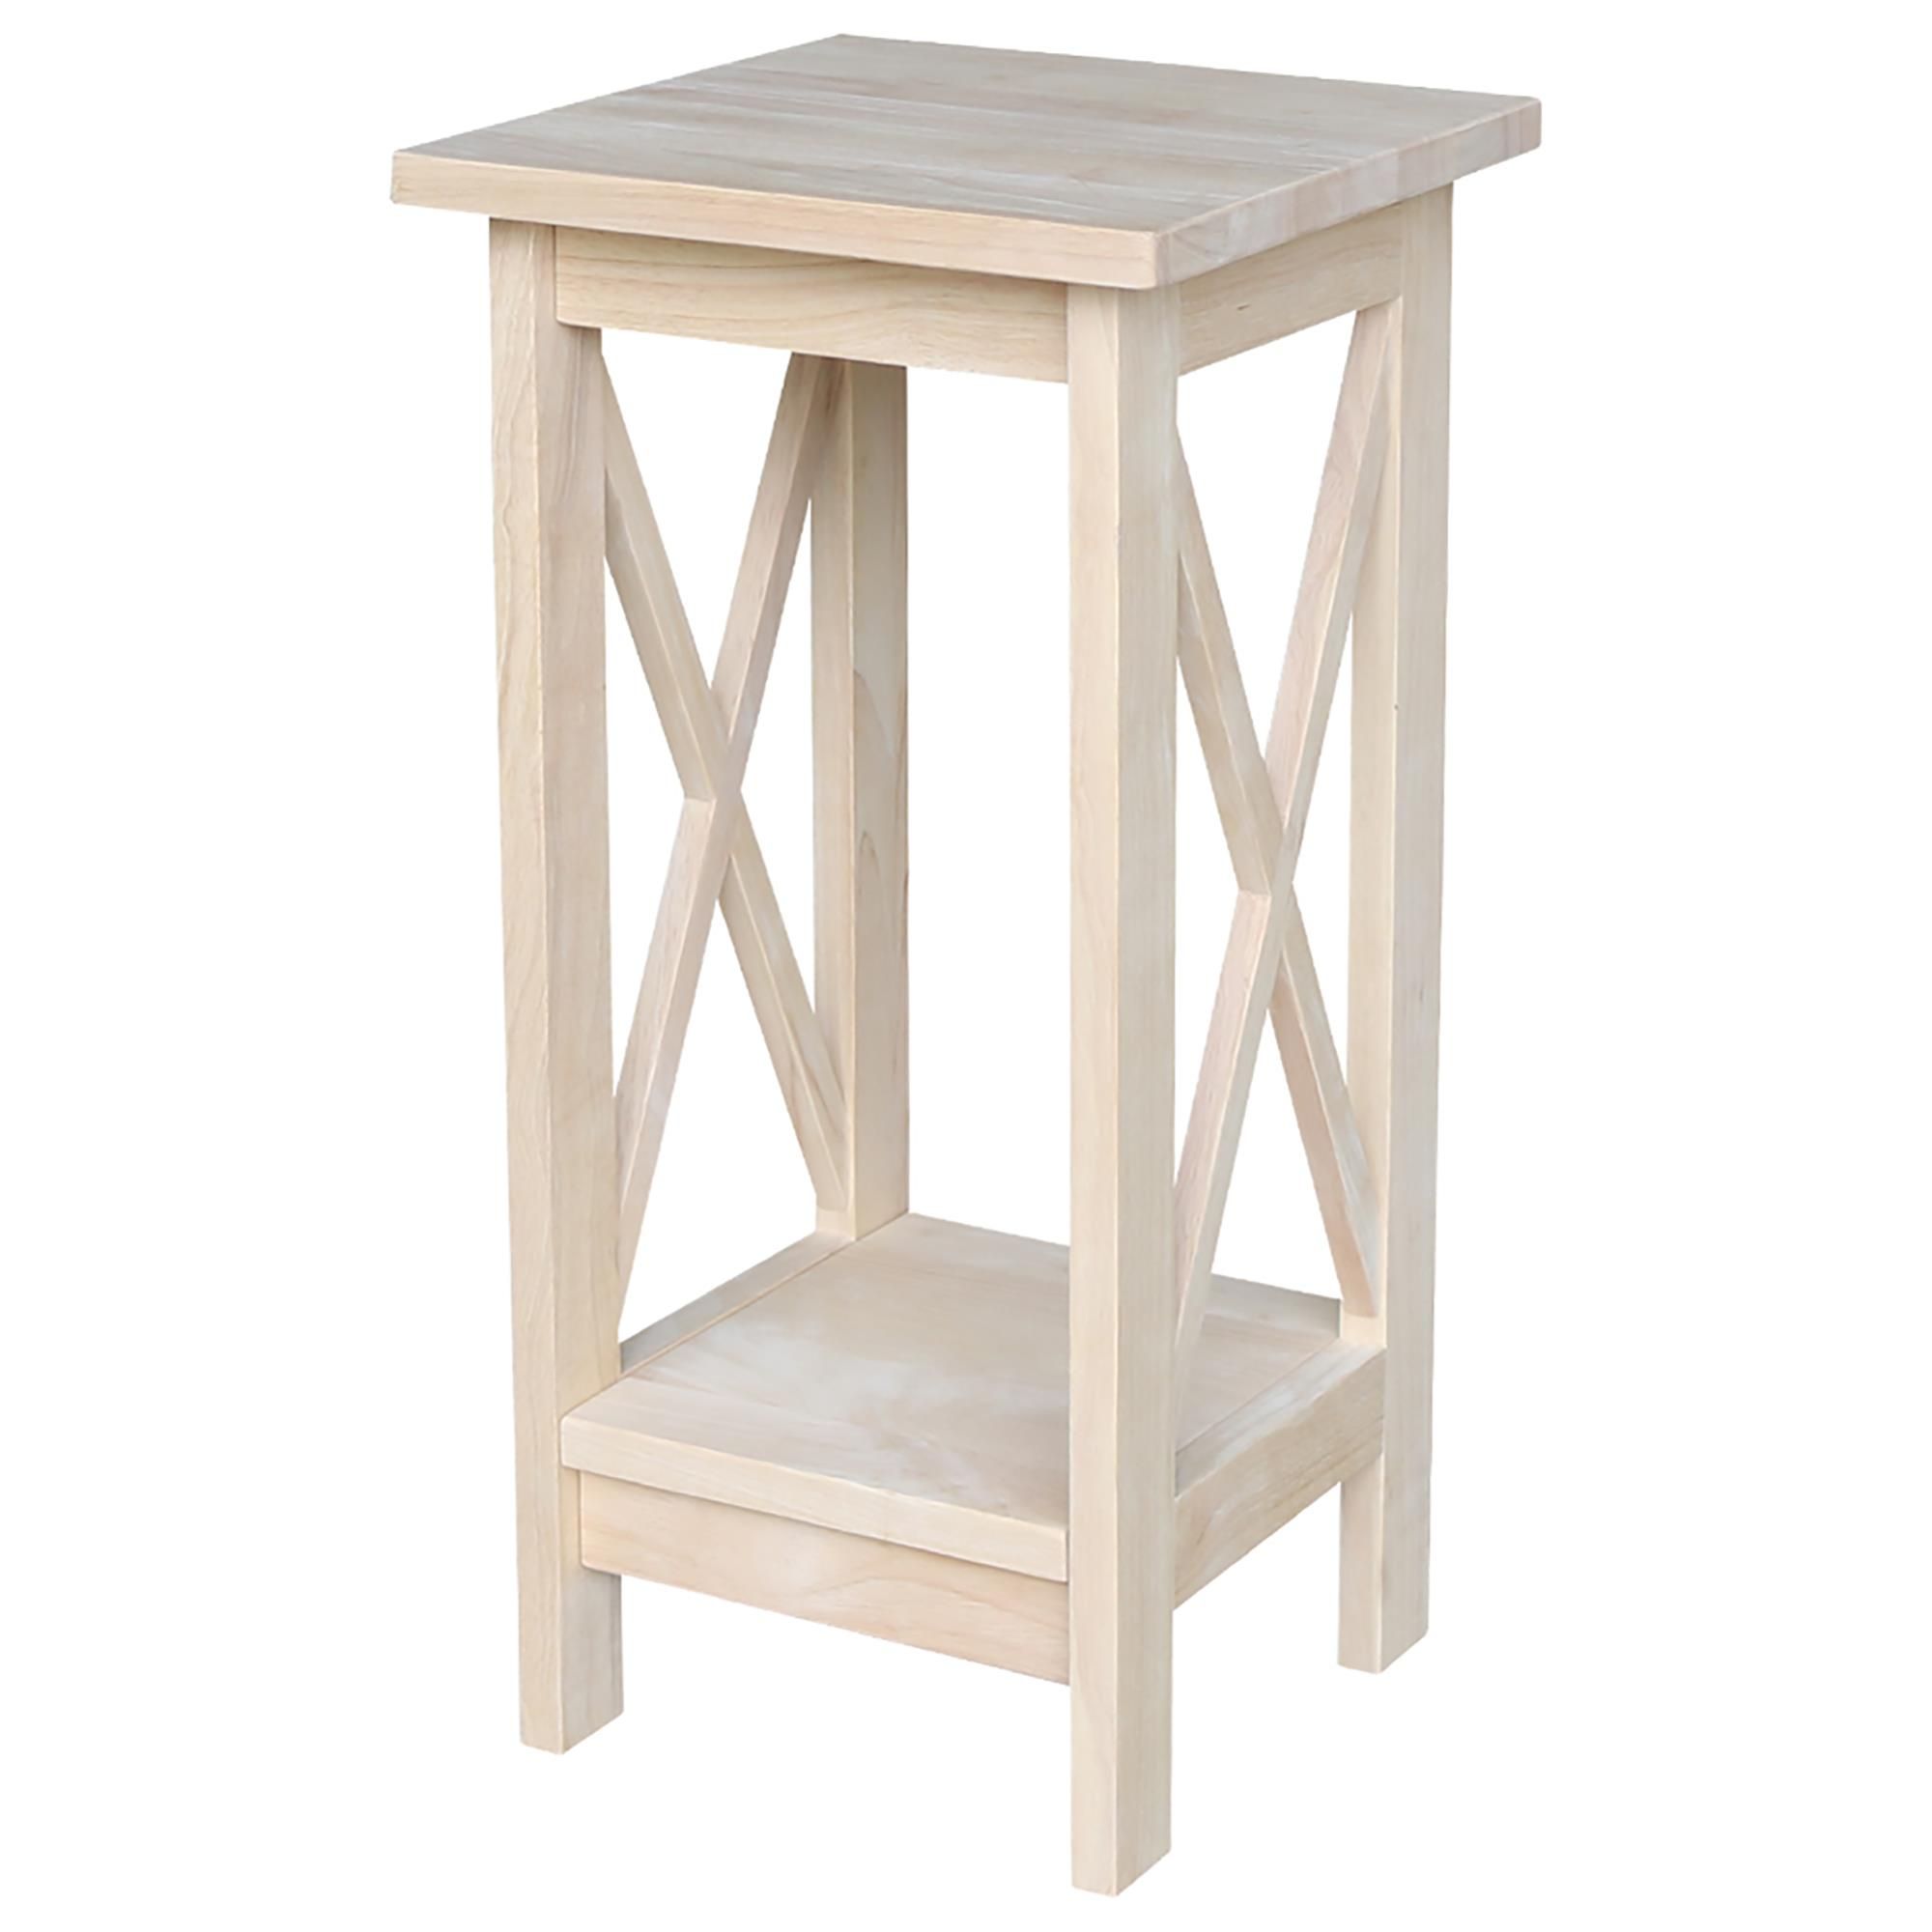 International Concepts 24" Plant Stand In Unfinished | Nebraska Furniture  Mart Intended For Unfinished Plant Stands (View 11 of 15)